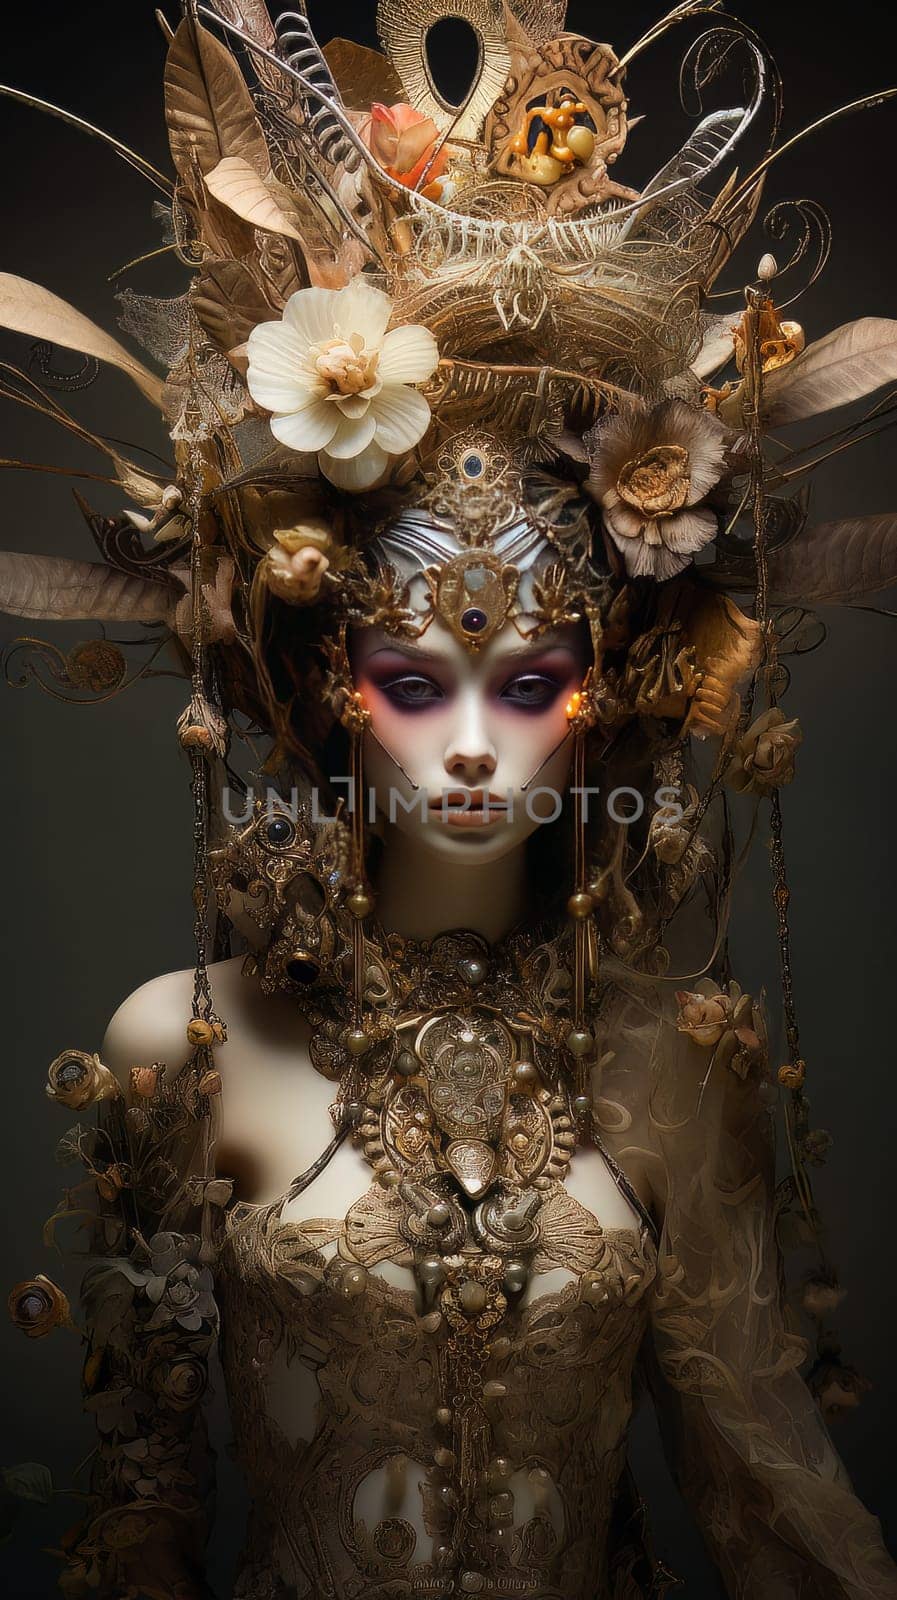 Surreal fairy tale character portrait of cartoon princess in a golden dress and a luxurious Ekibana headdress made of feathers and flowers in gold color AI